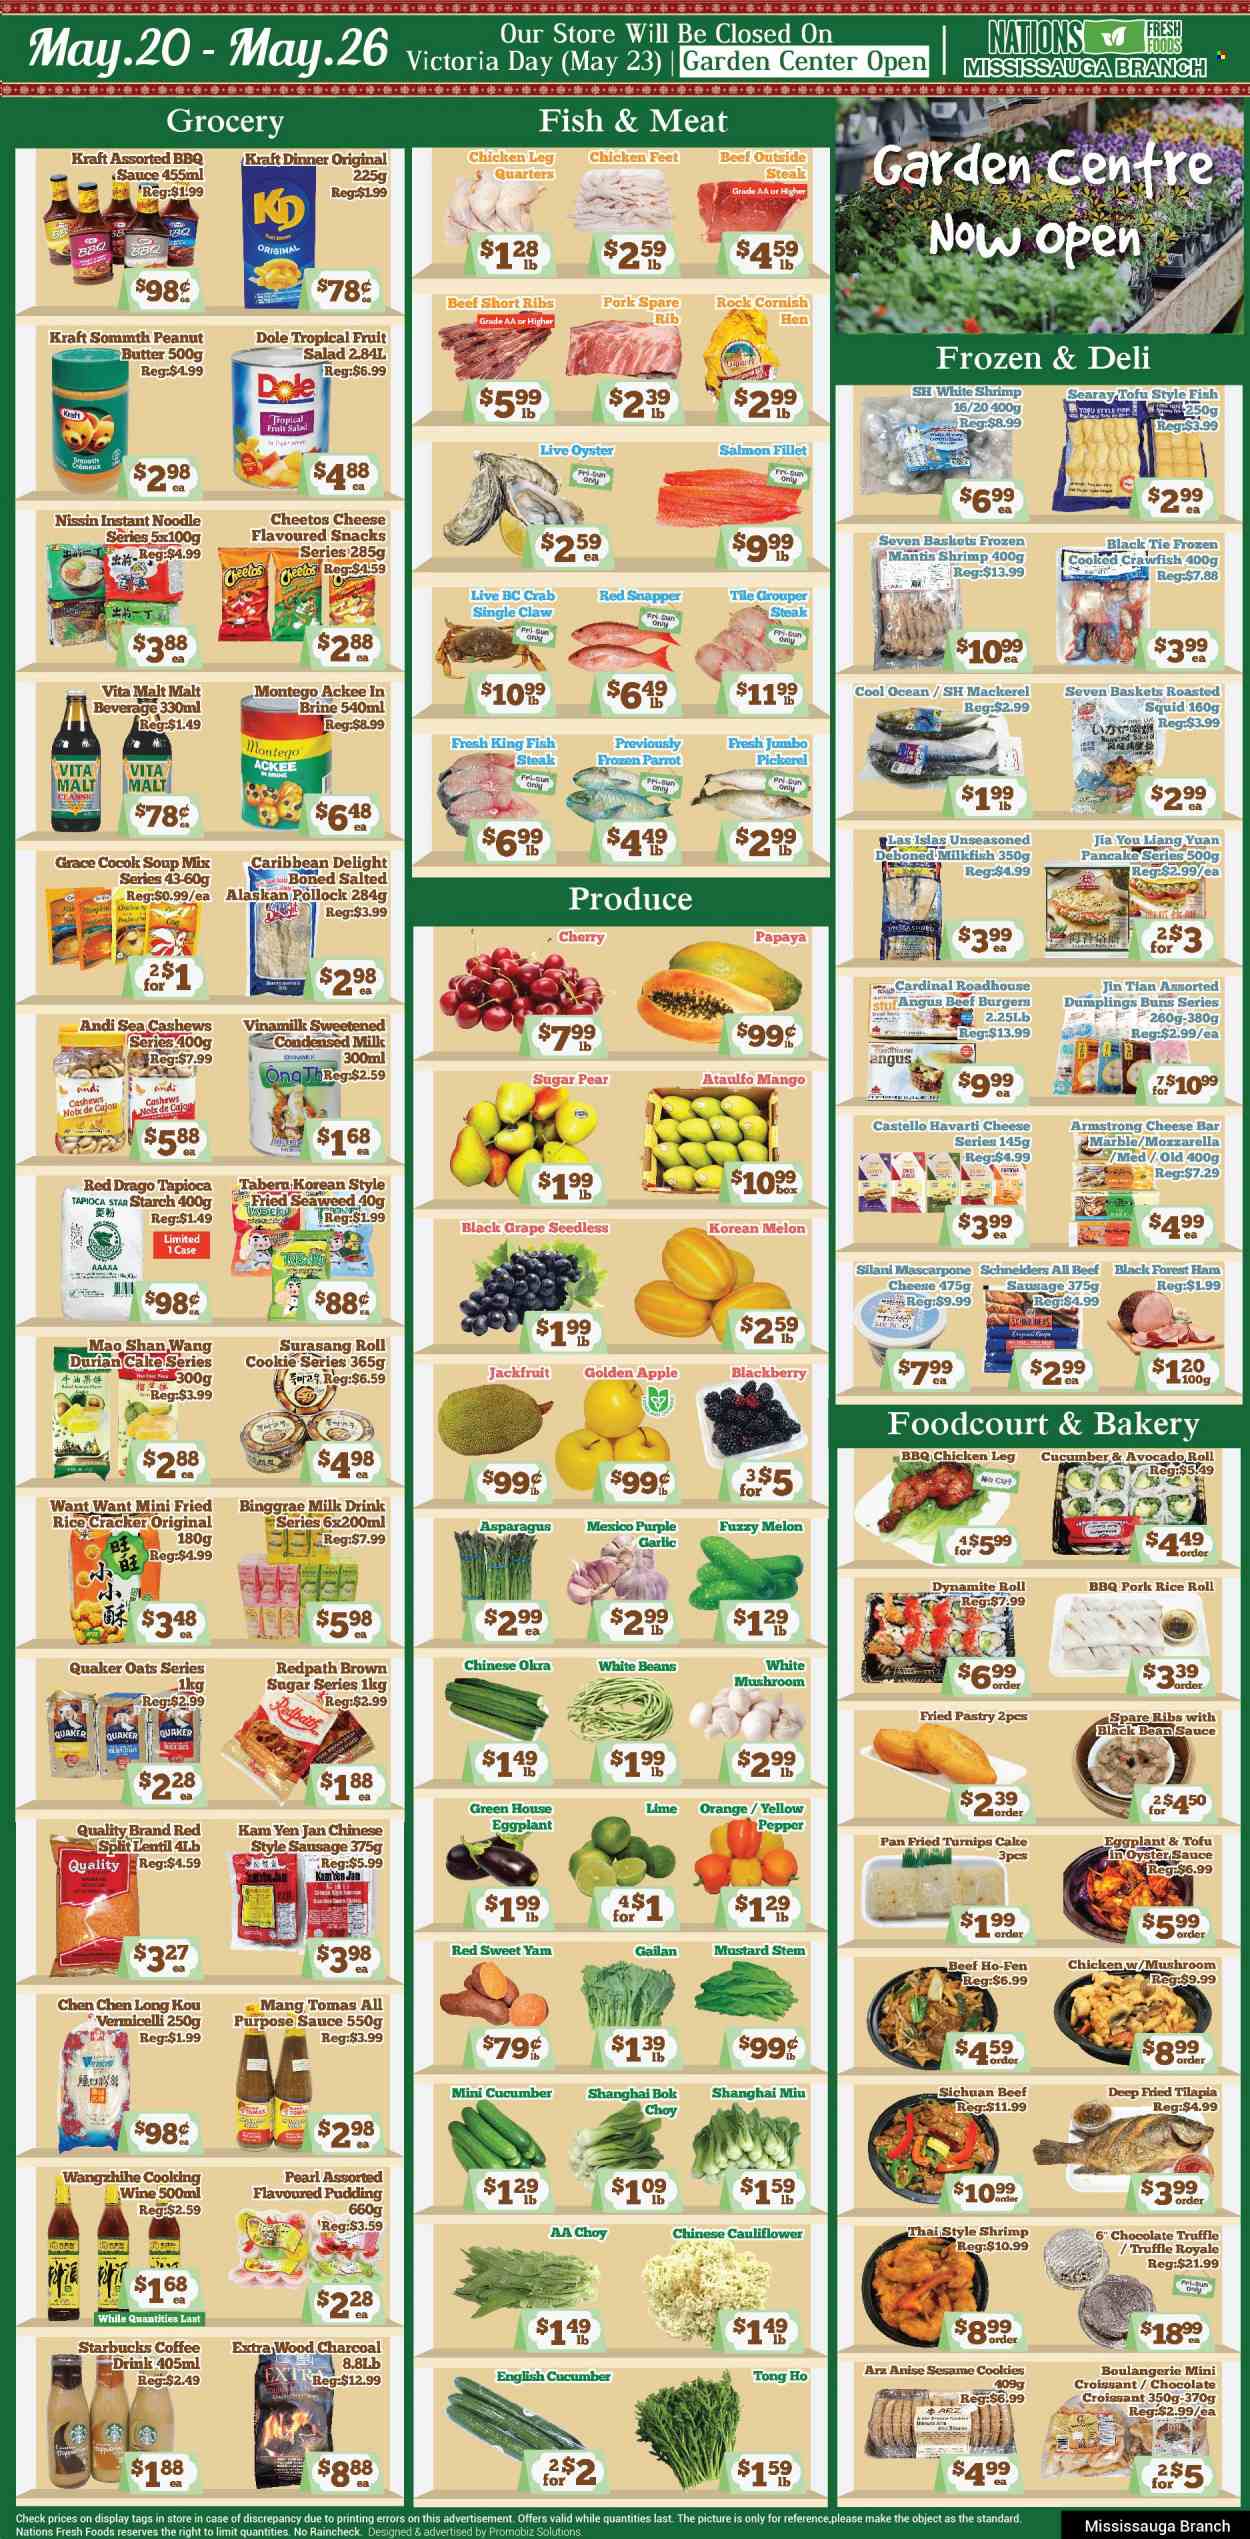 thumbnail - Nations Fresh Foods Flyer - May 20, 2022 - May 26, 2022 - Sales products - croissant, buns, asparagus, bok choy, cauliflower, turnips, okra, soup mix, snack, salad, Dole, eggplant, papaya, melons, fish fillets, grouper, mackerel, red snapper, salmon fillet, squid, tilapia, pollock, oysters, crab, fish, king fish, shrimps, fish steak, milkfish, walleye, soup, sauce, dumplings, Quaker, Kraft®, Nissin, ready meal, ham, mascarpone, mozzarella, Havarti, tofu, pudding, flavoured milk, condensed milk, crawfish, cookies, truffles, crackers, bars, Cheetos, rice crackers, salty snack, cane sugar, starch, sugar, oats, seaweed, fruit salad, BBQ sauce, mustard, oyster sauce, peanut butter, cashews, malt beverage, coffee, Starbucks, cooking wine, wine, alcohol, cornish hen, chicken legs, chicken paws, chicken, beef ribs, steak, pork spare ribs, pears. Page 1.